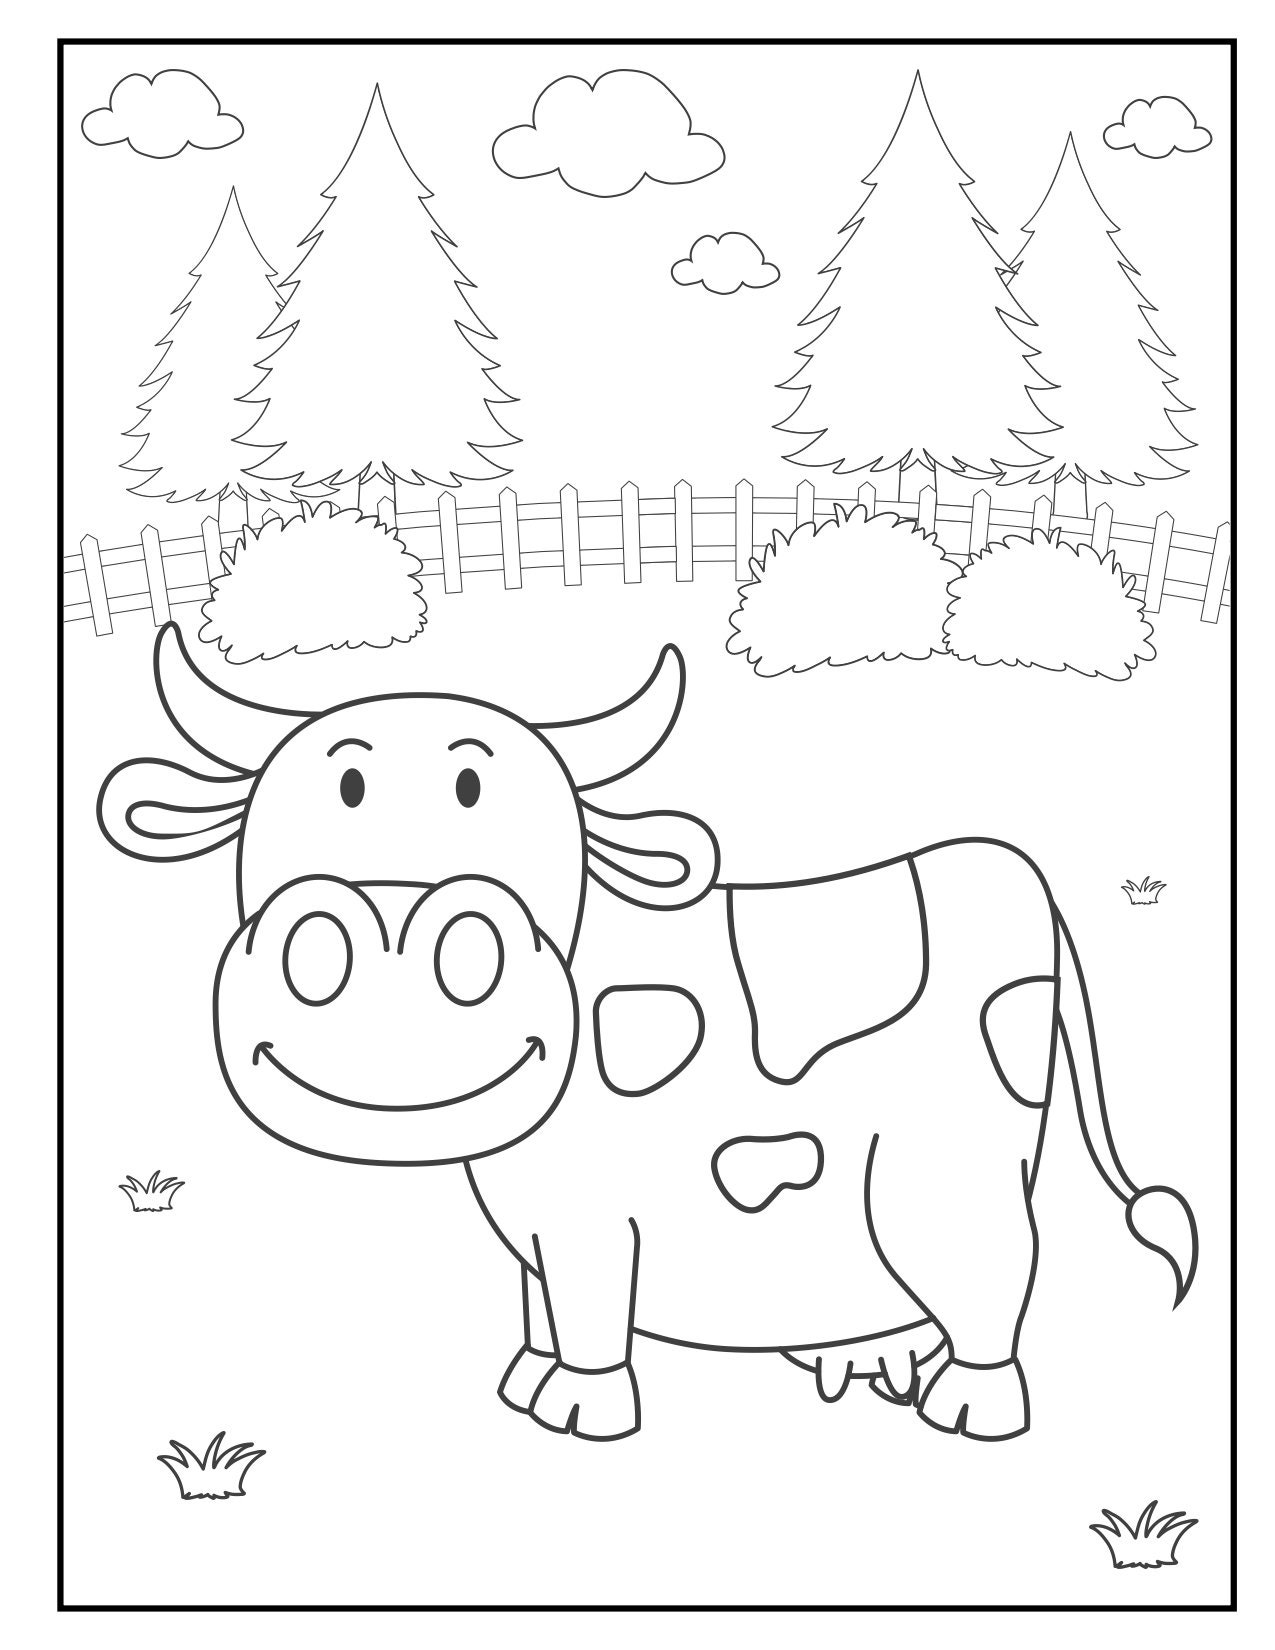 Printable Animal Coloring Pages - Etsy